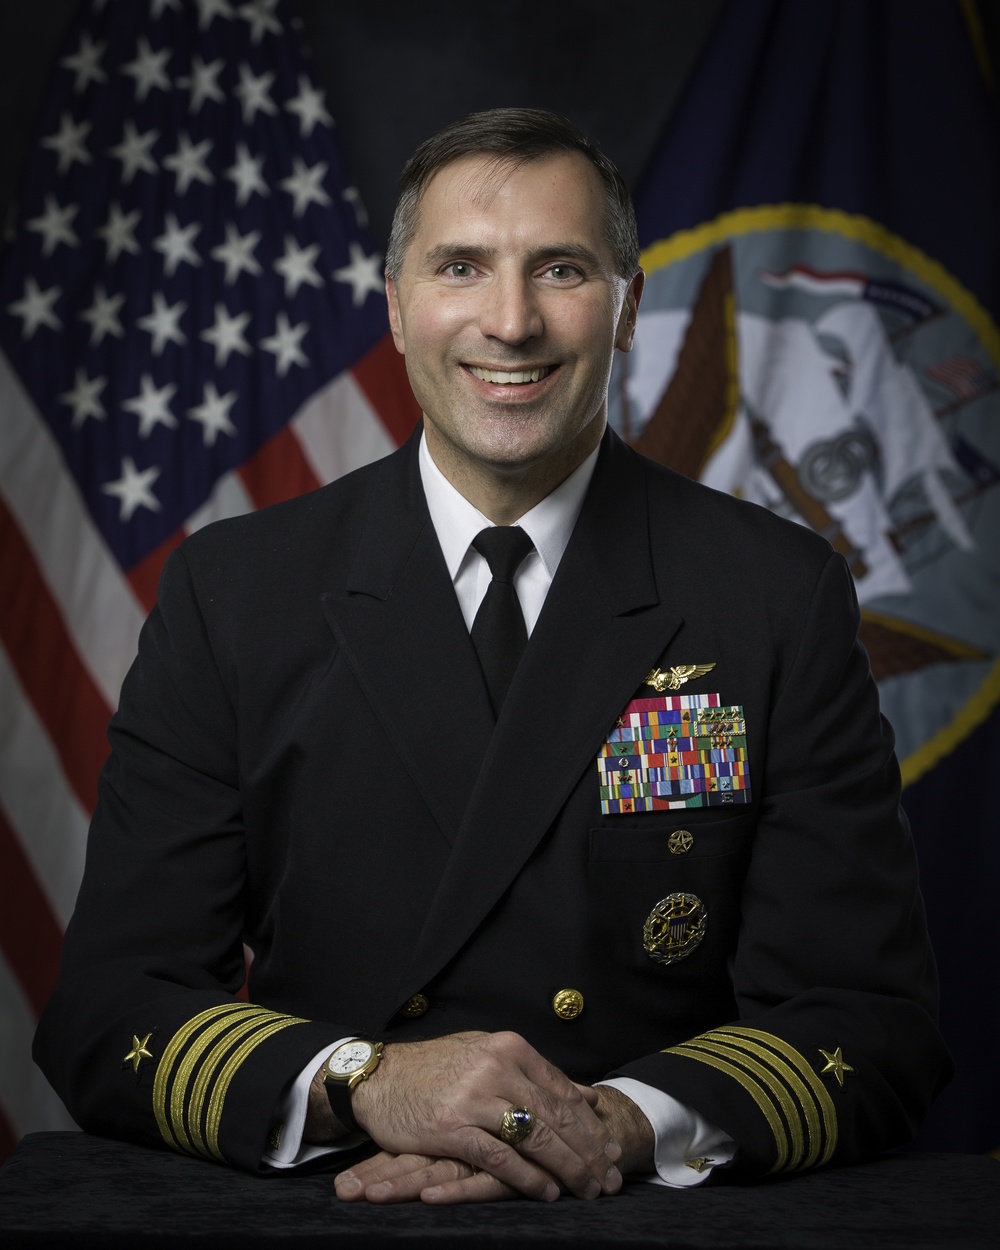 Official portrait, Air Warfare Manpower Branch Head for the Office of the Chief of Naval Operations (OPNAV N98), Capt. William D. Park, US Navy